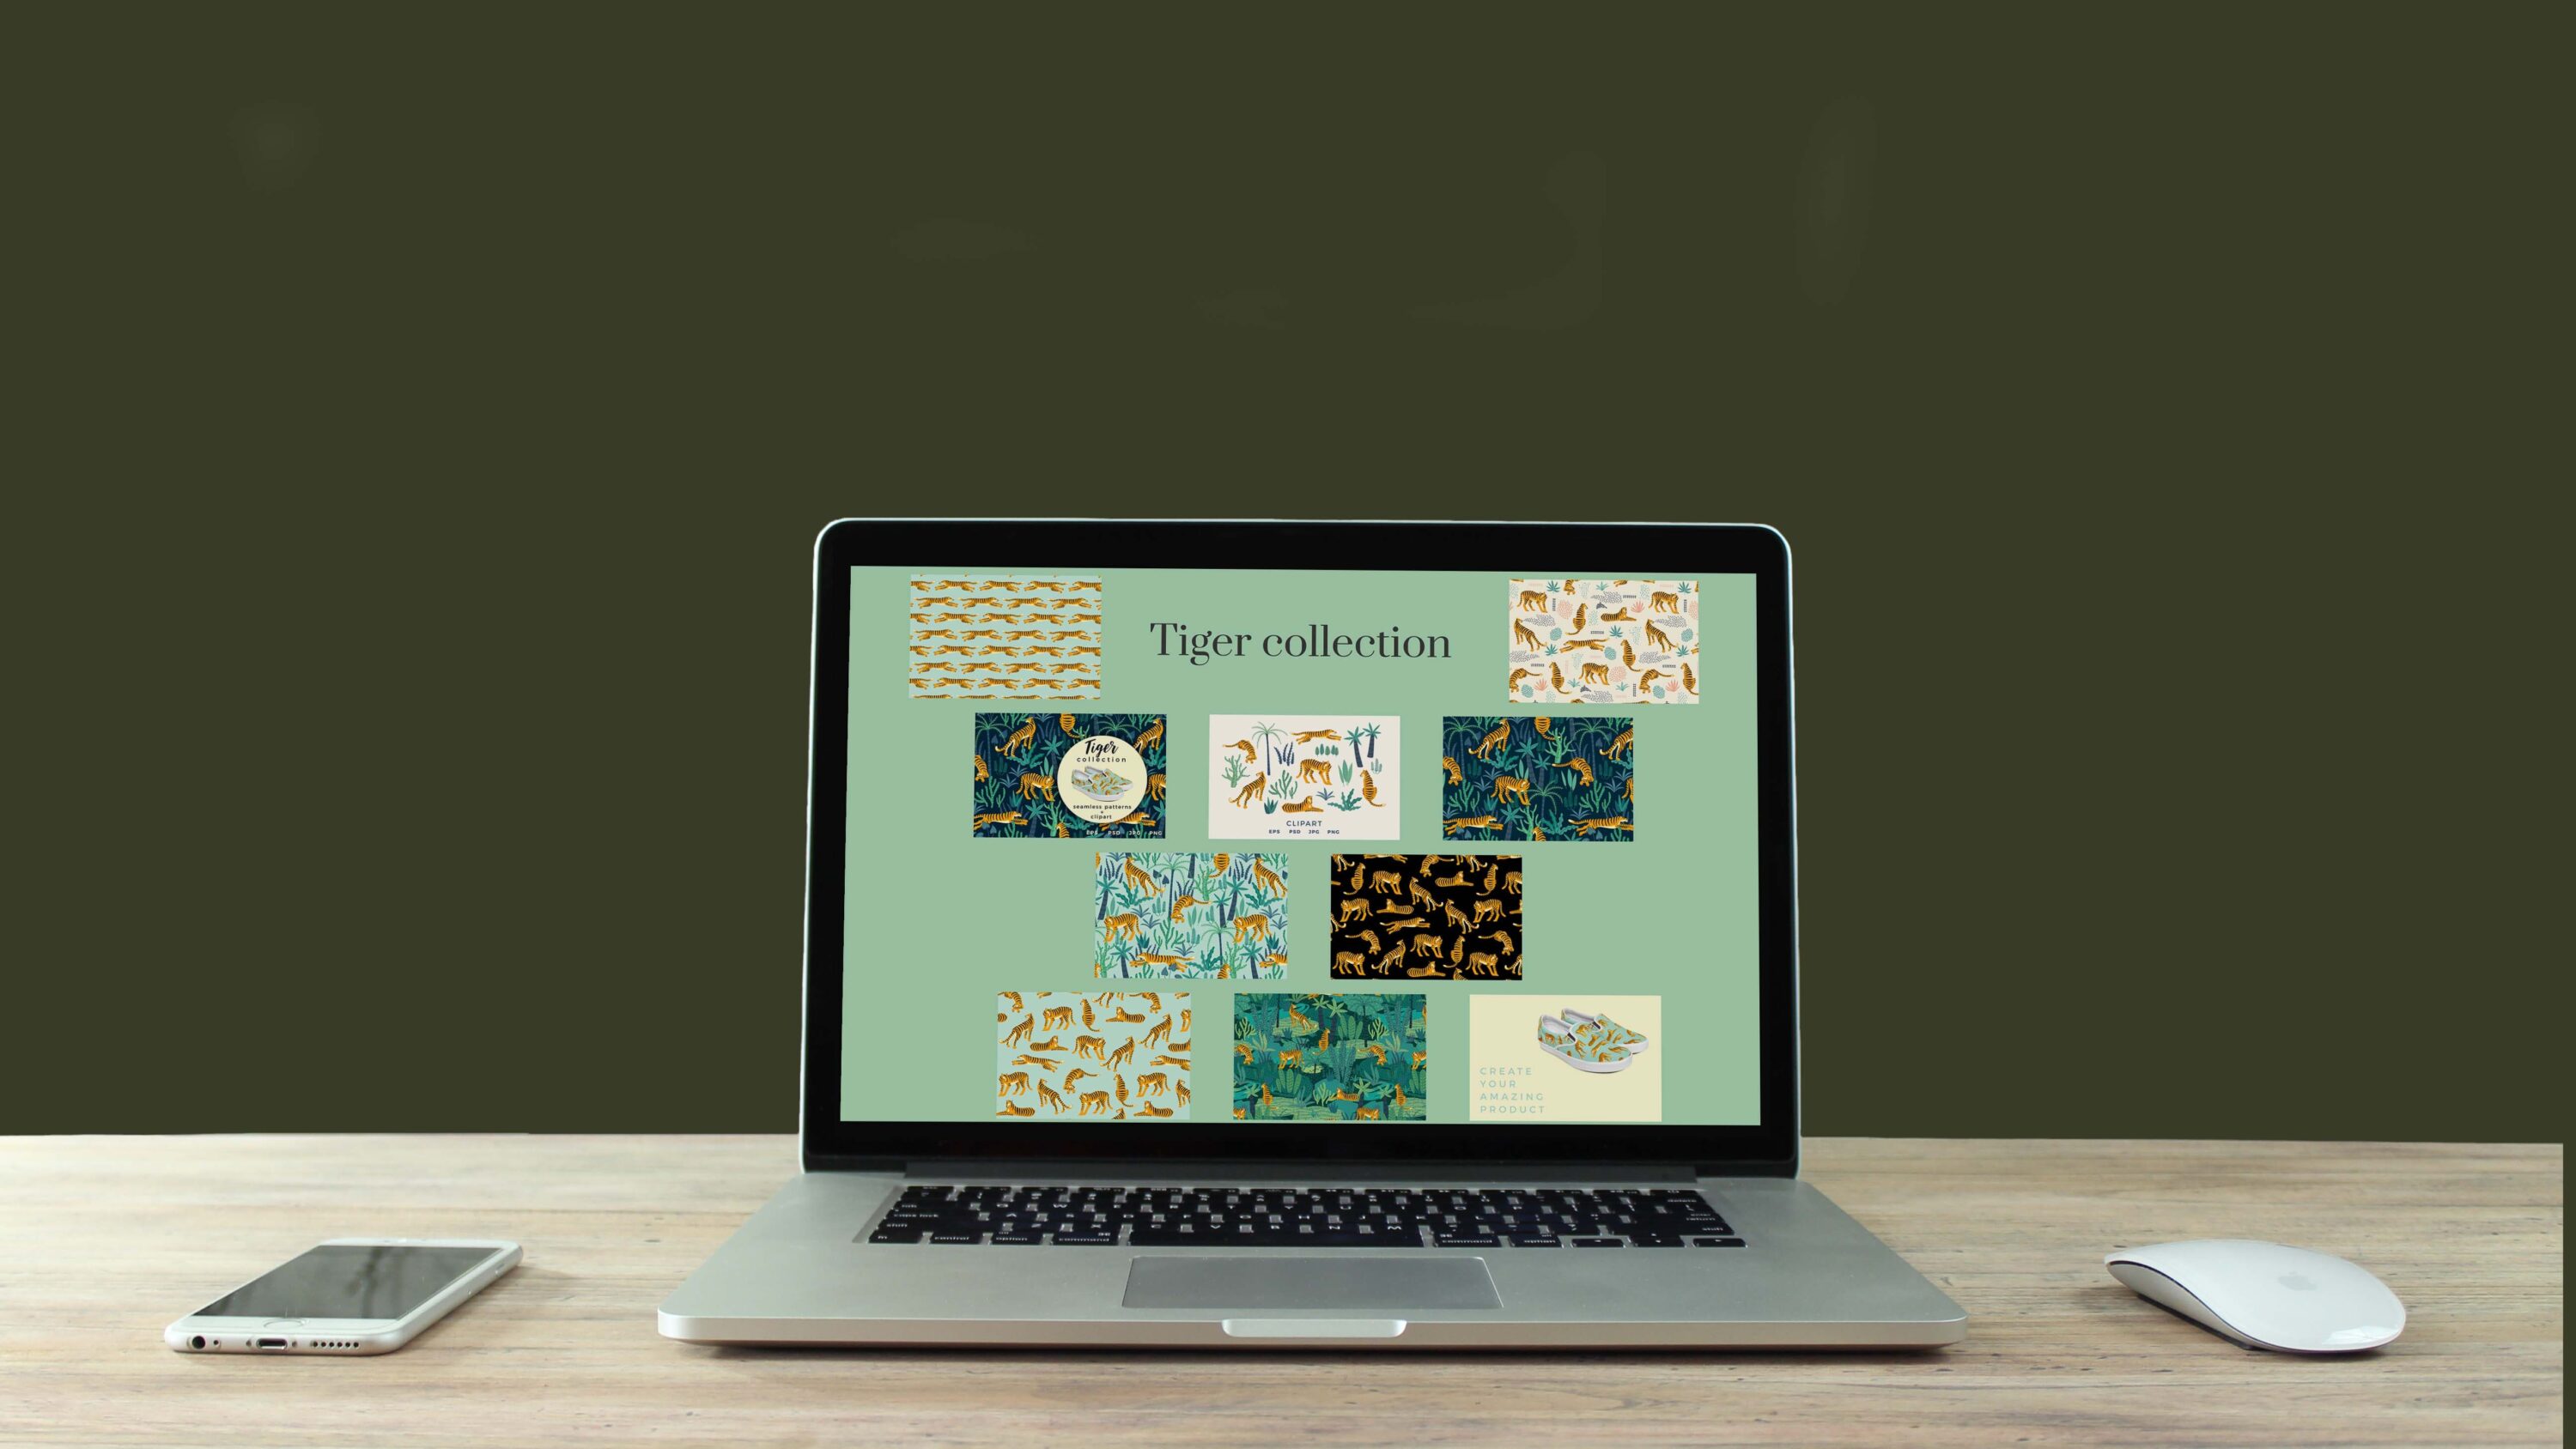 Tiger collection. Patterns & clipart - laptop.